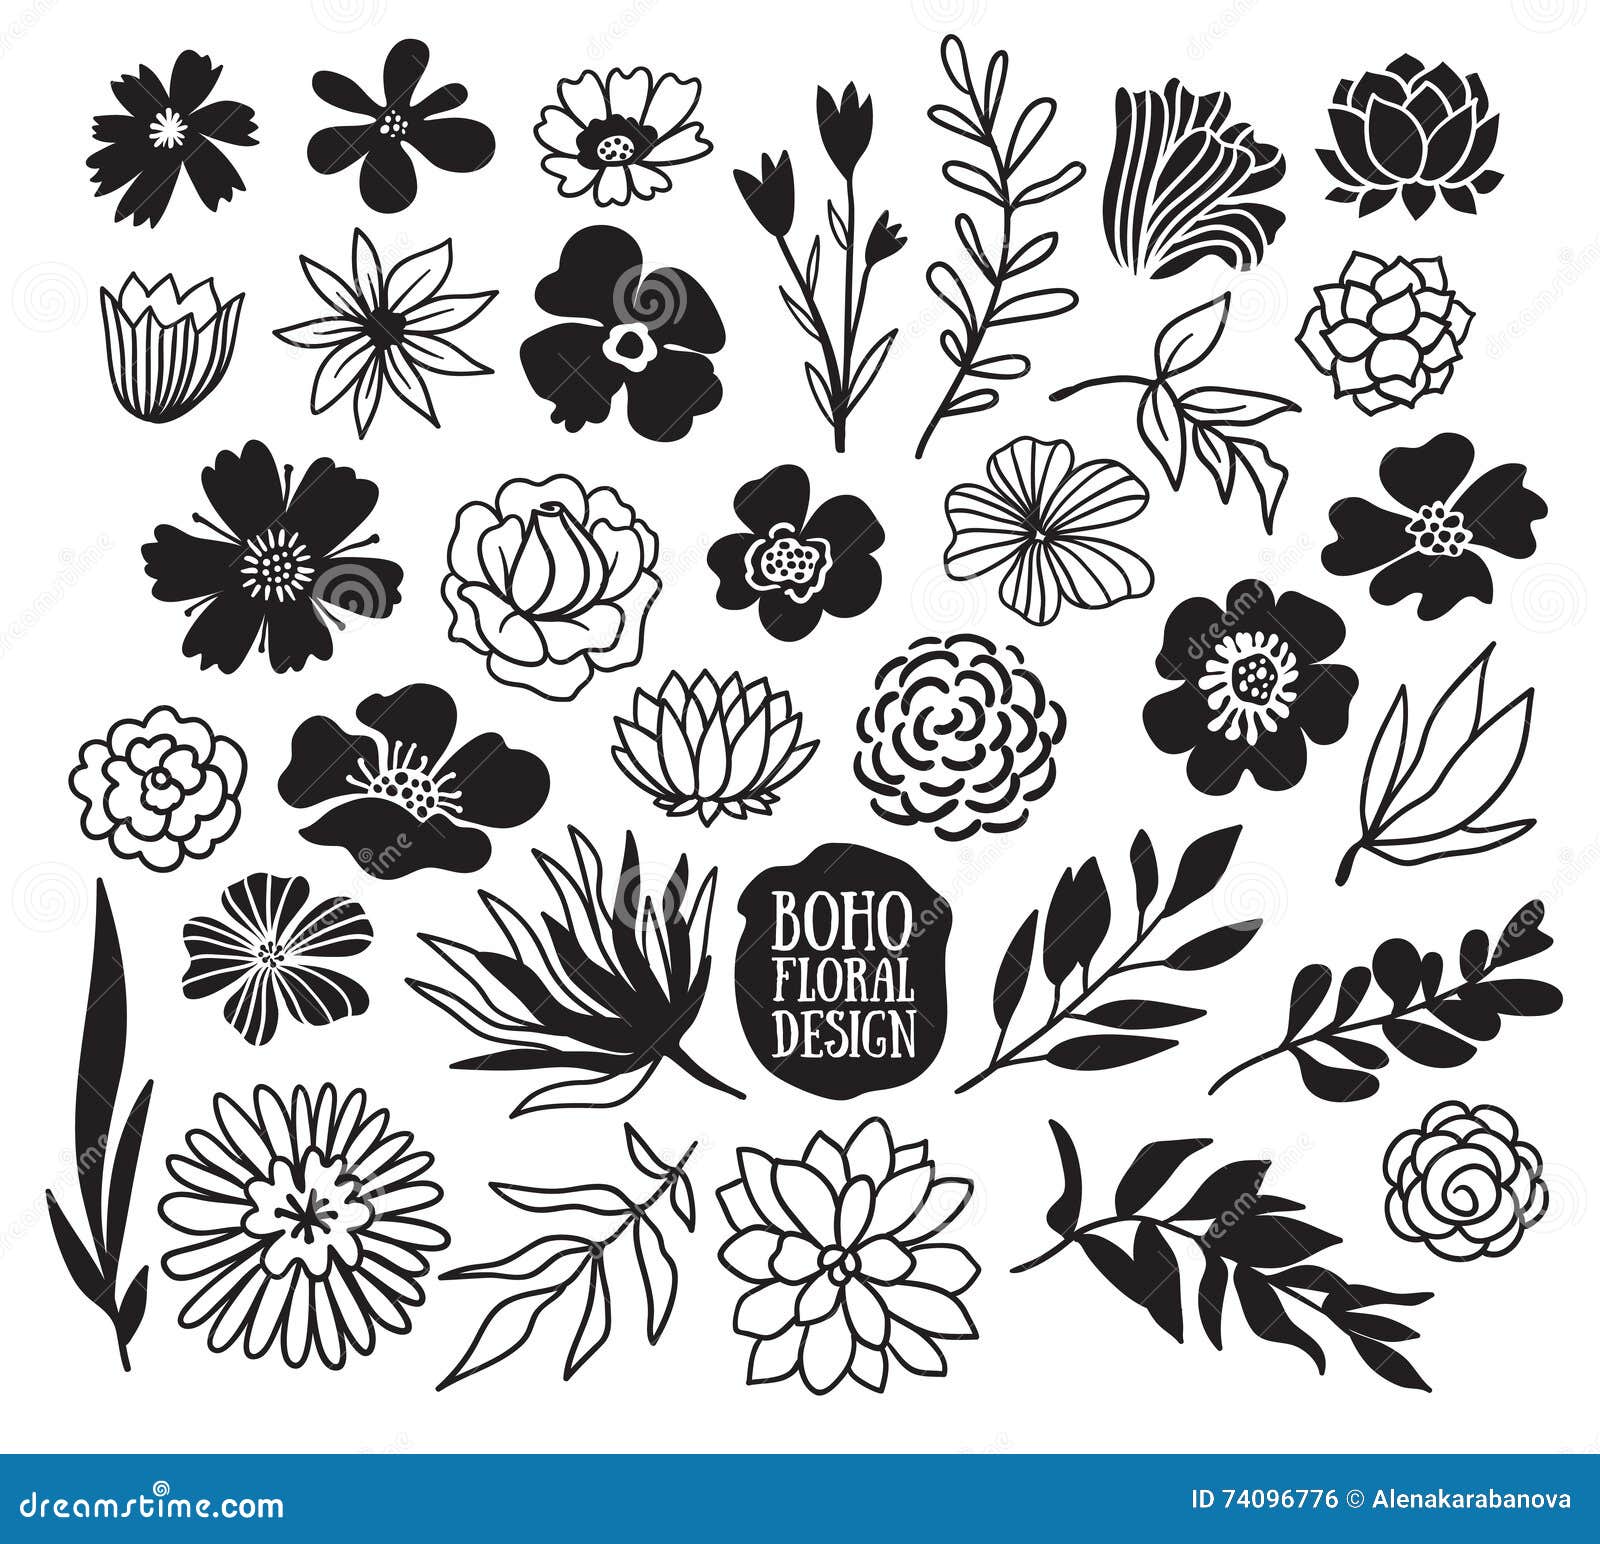 boho black decorative plants and flowers collection.